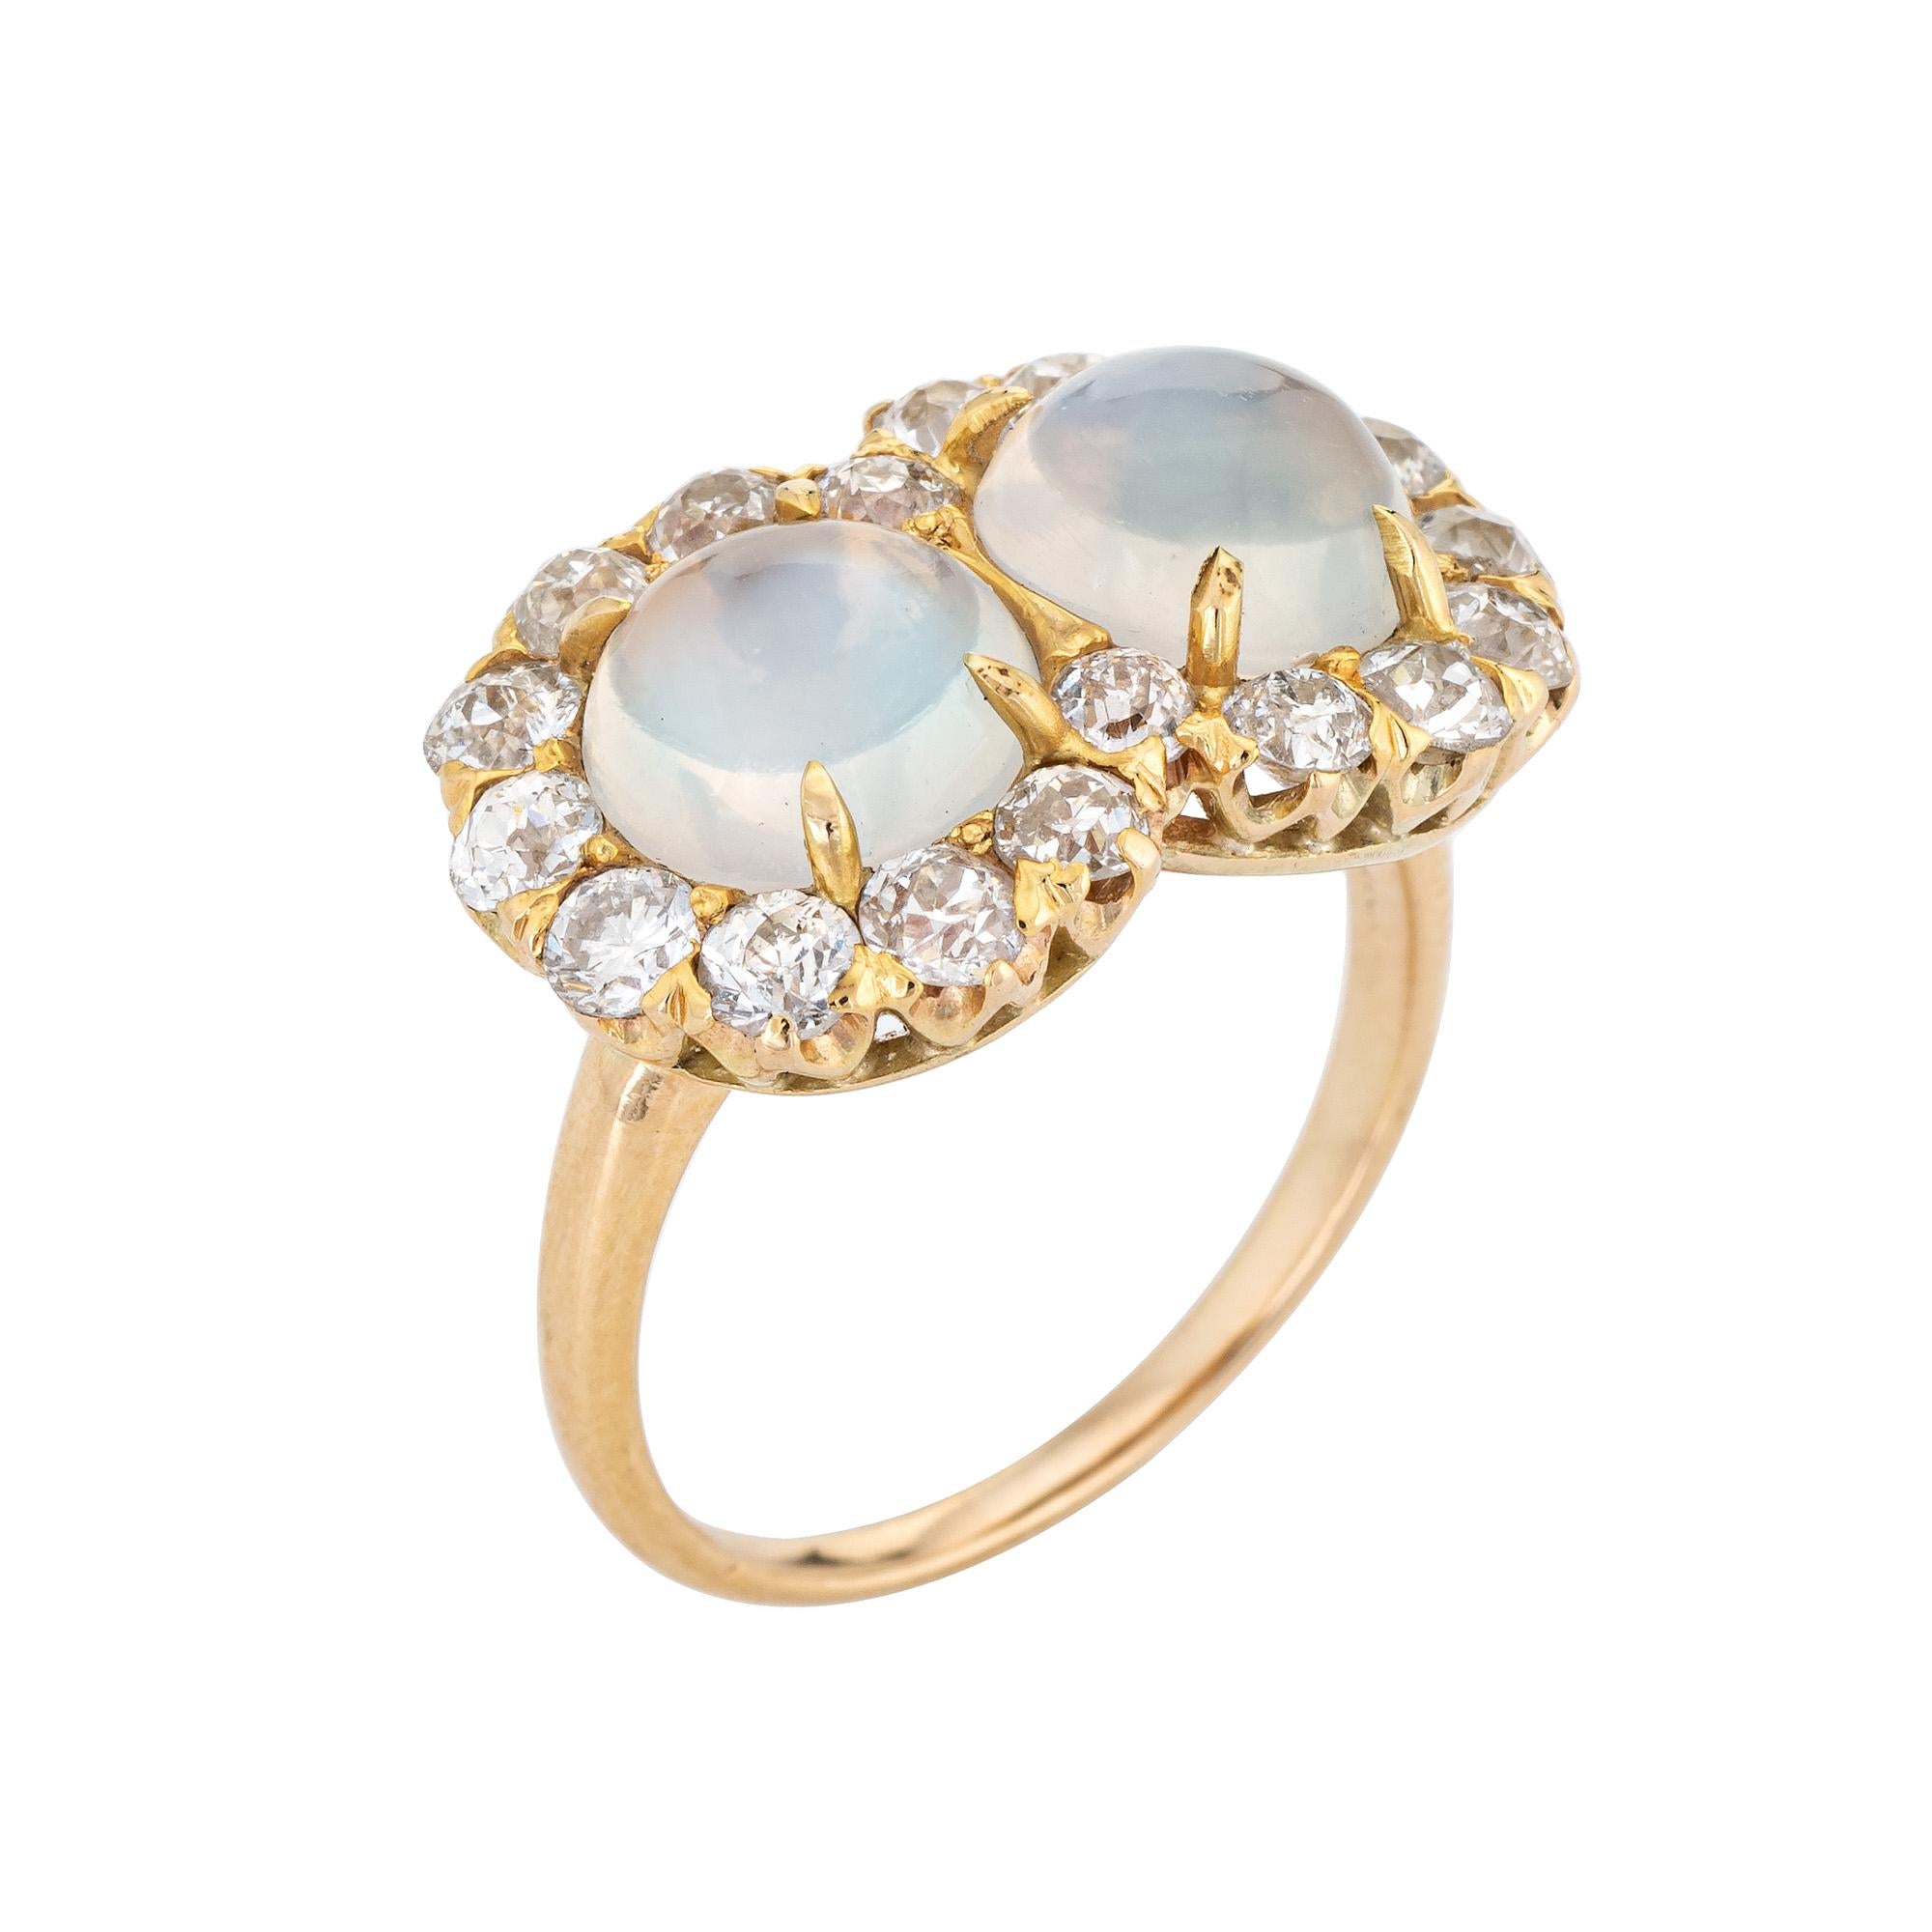 Stylish antique Edwardian moonstone & diamond ring (circa 1900s to 1910s) crafted in 14 karat yellow gold. 

Cabochon cut moonstones each measure 8mm (estimated 3 carats each - 6 carats total estimated weight) accented with 19 estimated 0.12 carat